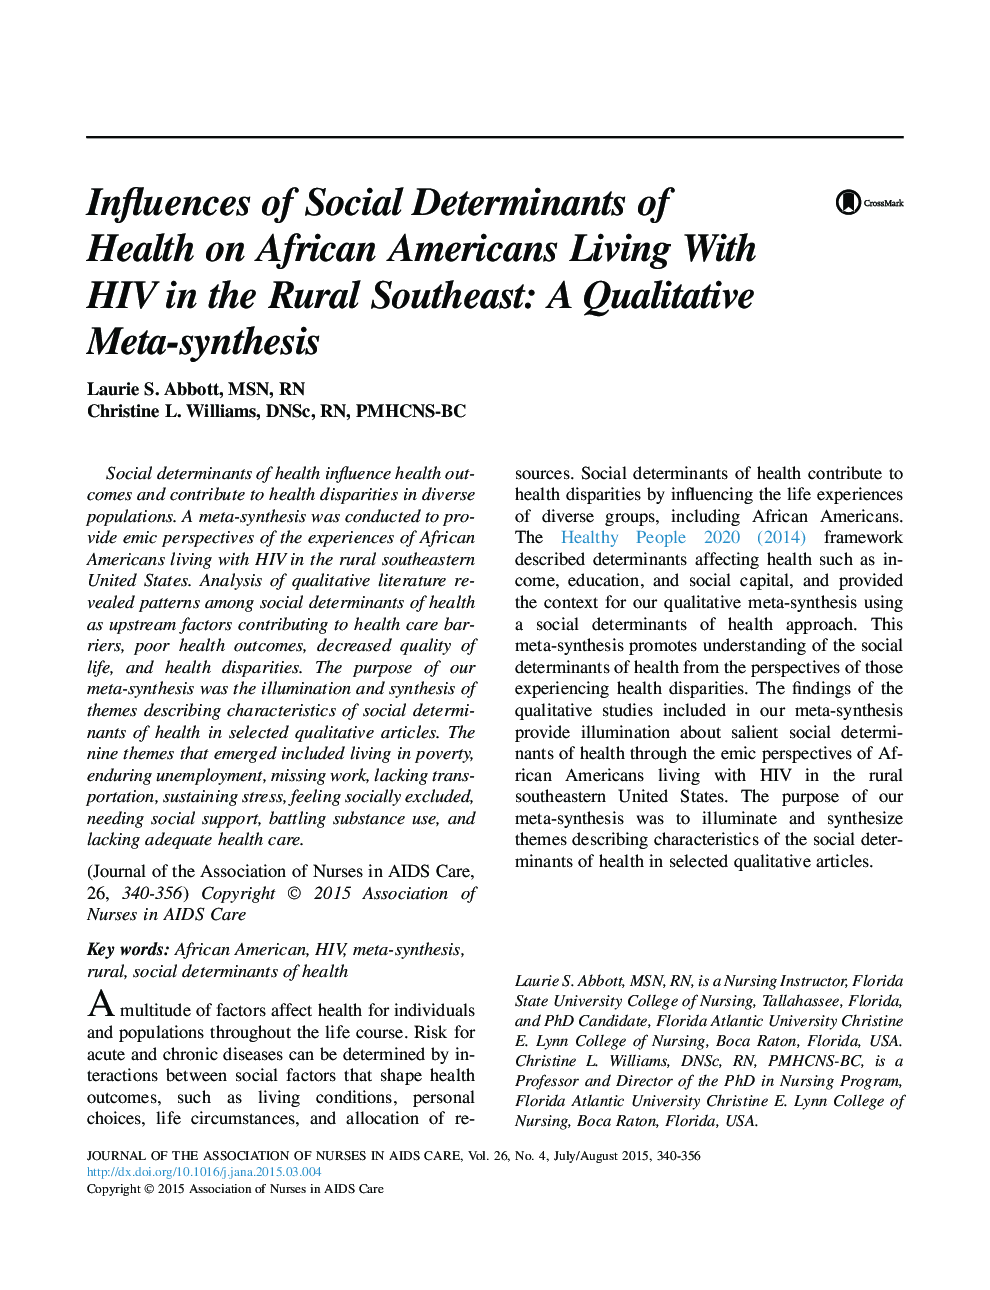 Influences of Social Determinants of Health on African Americans Living With HIV in the Rural Southeast: A Qualitative Meta-synthesis